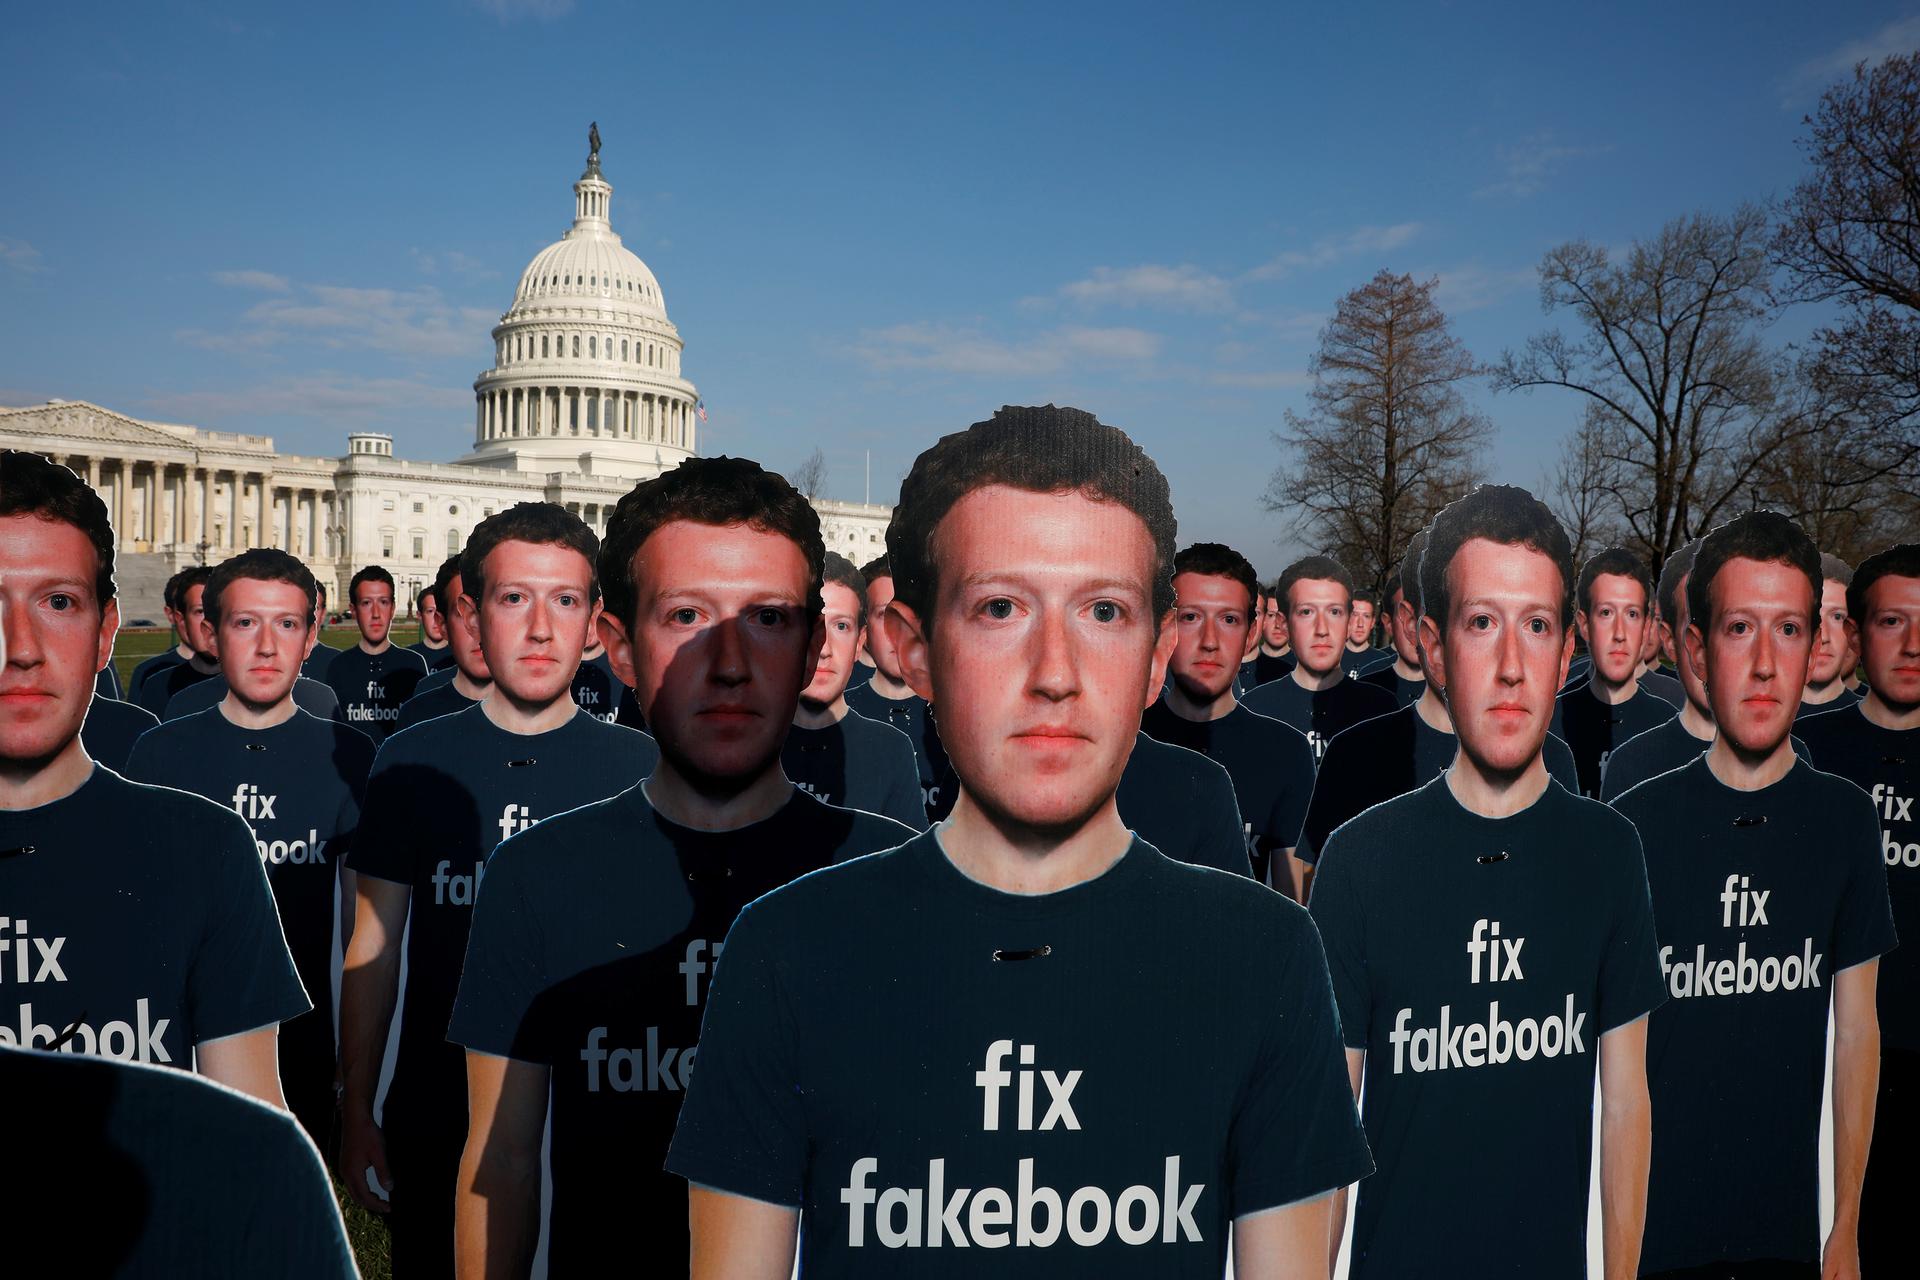 Dozens of cardboard cutouts of Facebook CEO Mark Zuckerberg are seen during an Avaaz.org protest outside the U.S. Capitol in Washington, U.S., April 10, 2018.